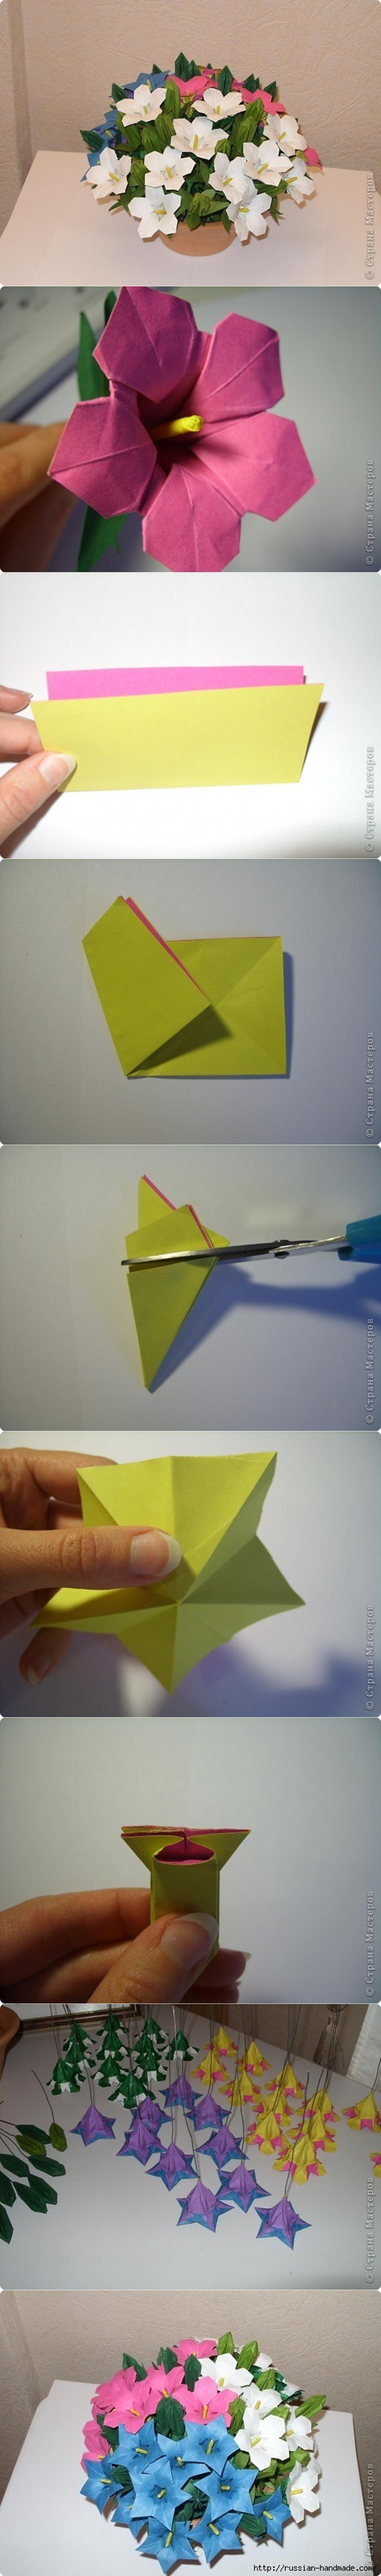 how to make paper flowers using origami the art of paper folding fun paper diy on pumpernickel pixie